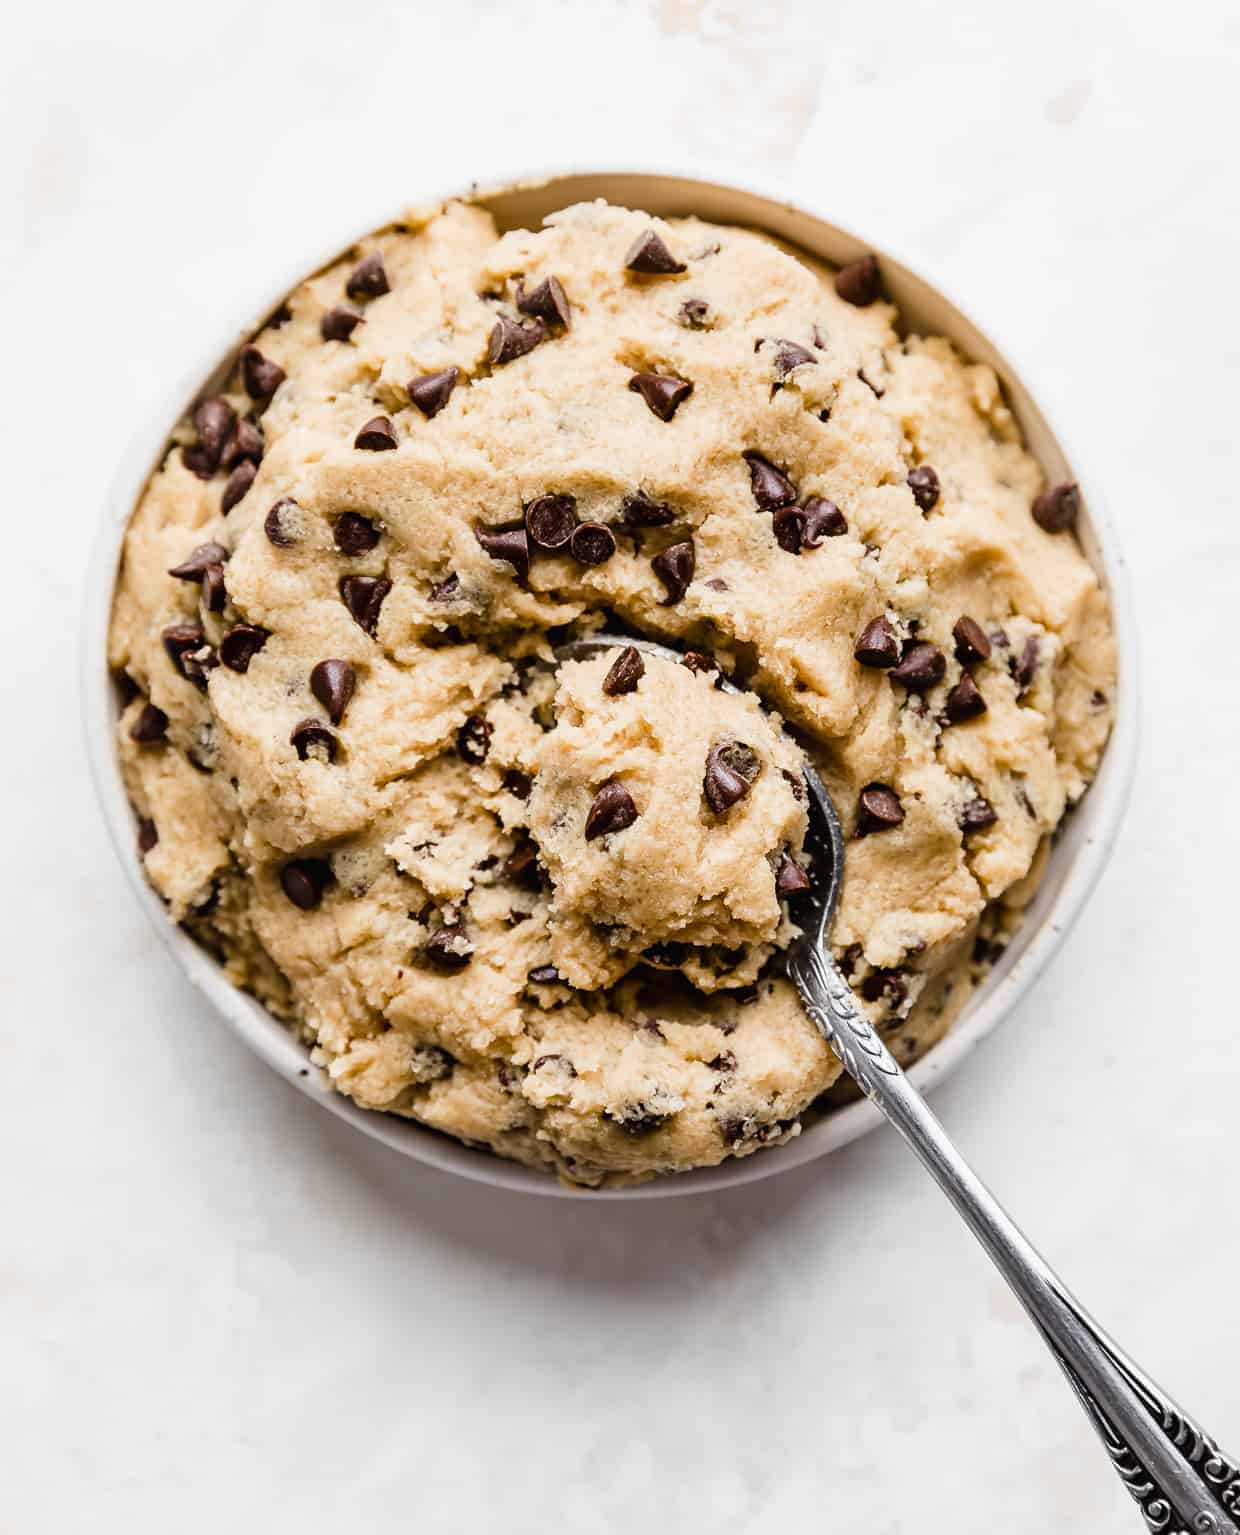 A plate full of chocolate chip cookie dough with a spoon scooping up a portion of the dough.